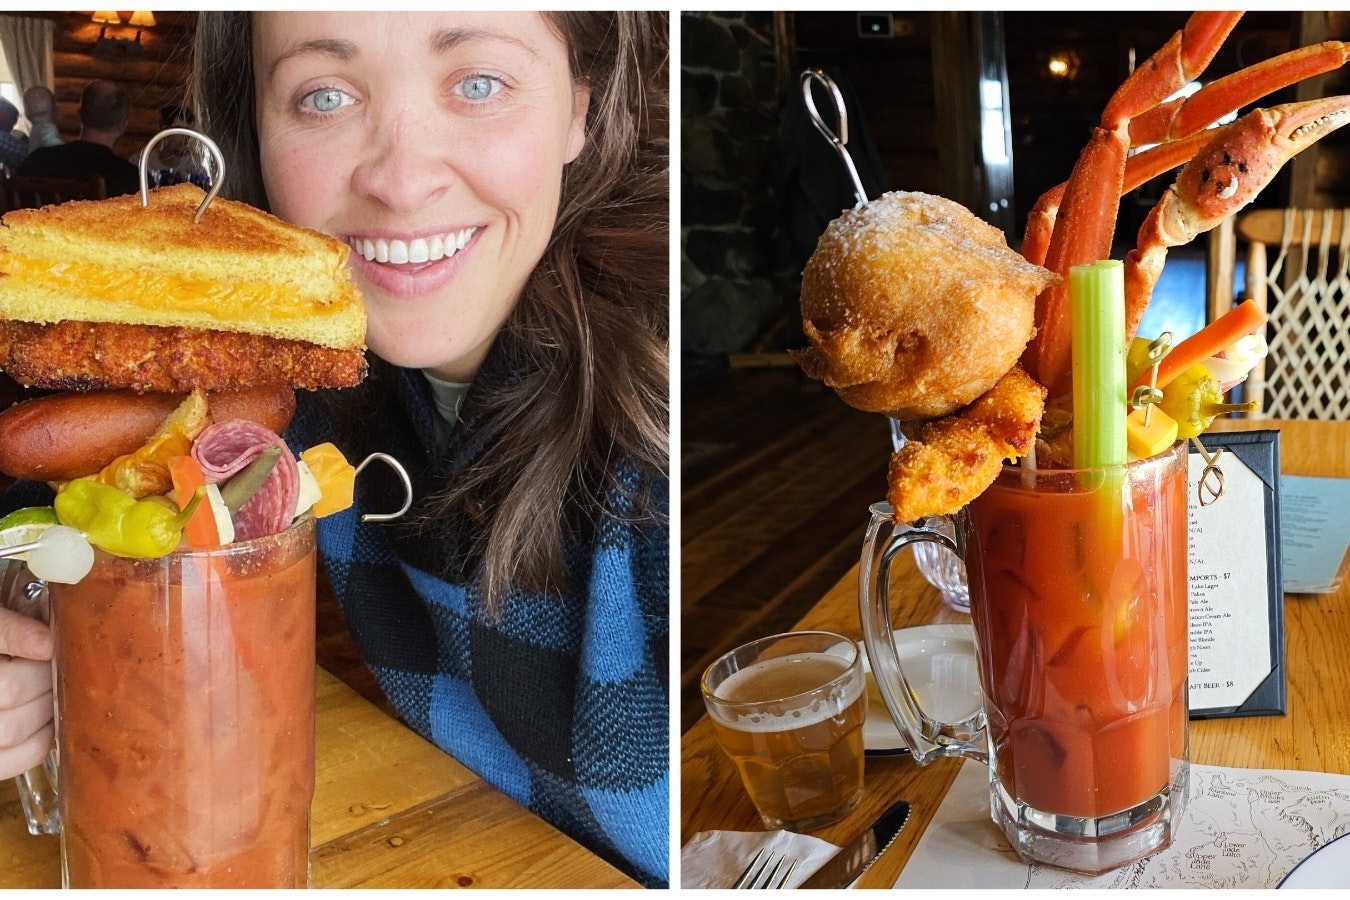 Whether it's with a seafood theme of crab legs or comfort food like a corn dog and grilled cheese, the Brooks Lake Lodge bloody mary is memorable.